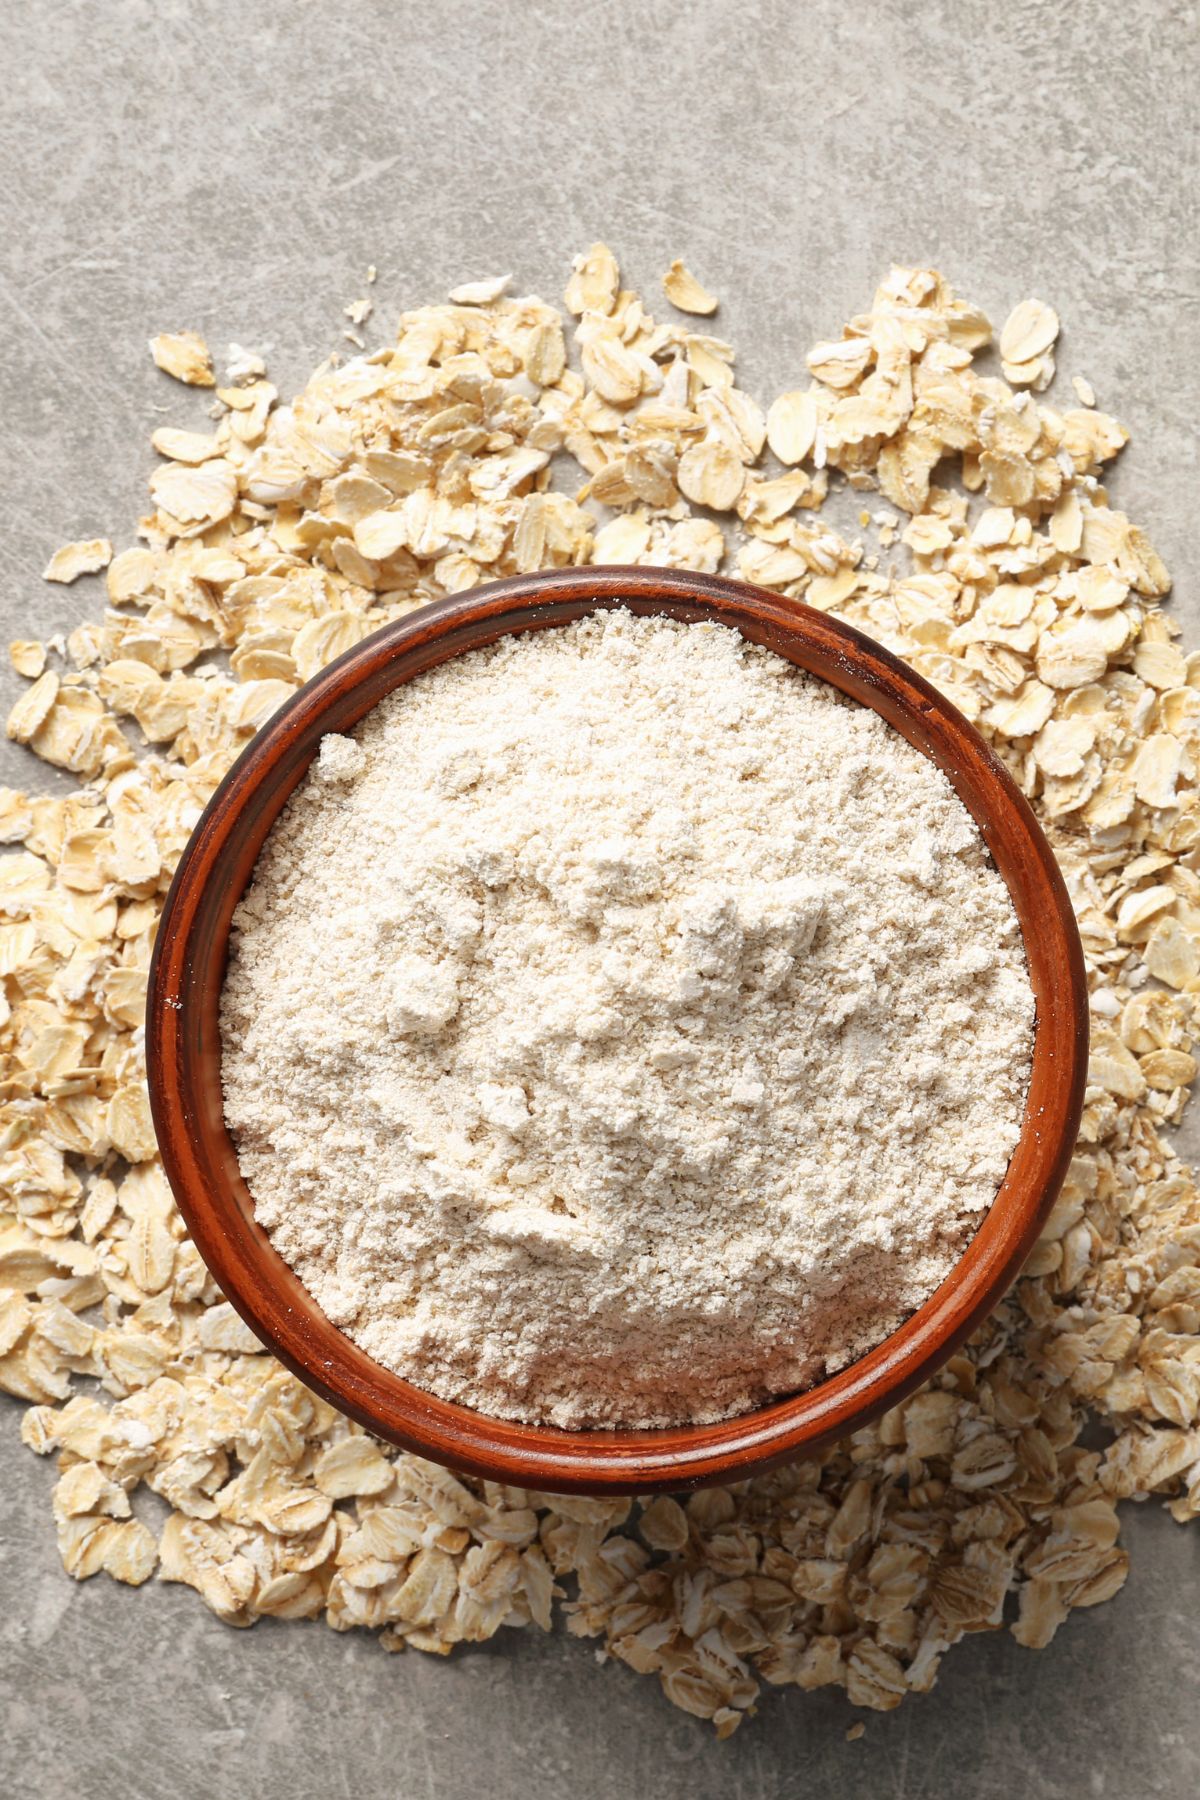 Bowl of oat flour with scattered oats on stone surface.